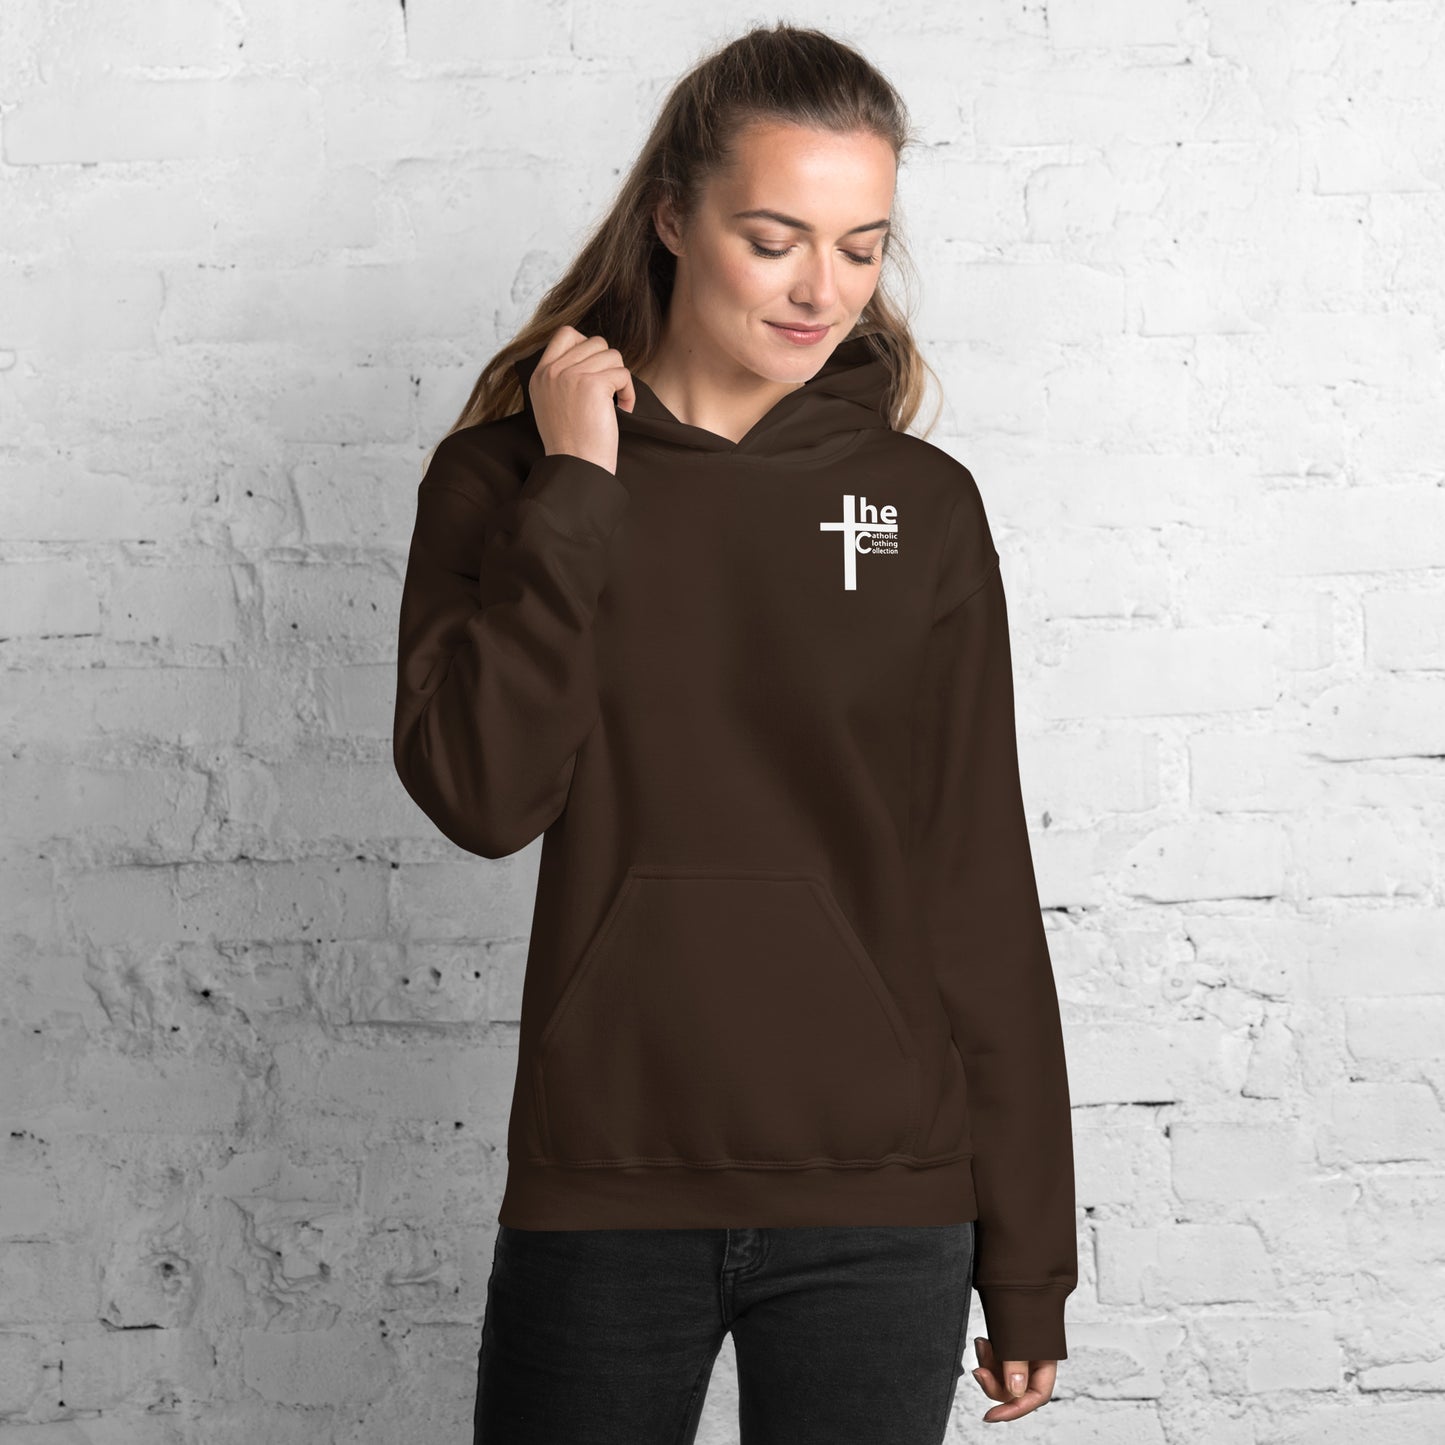 Our Lady of Fatima Women's Hoodie